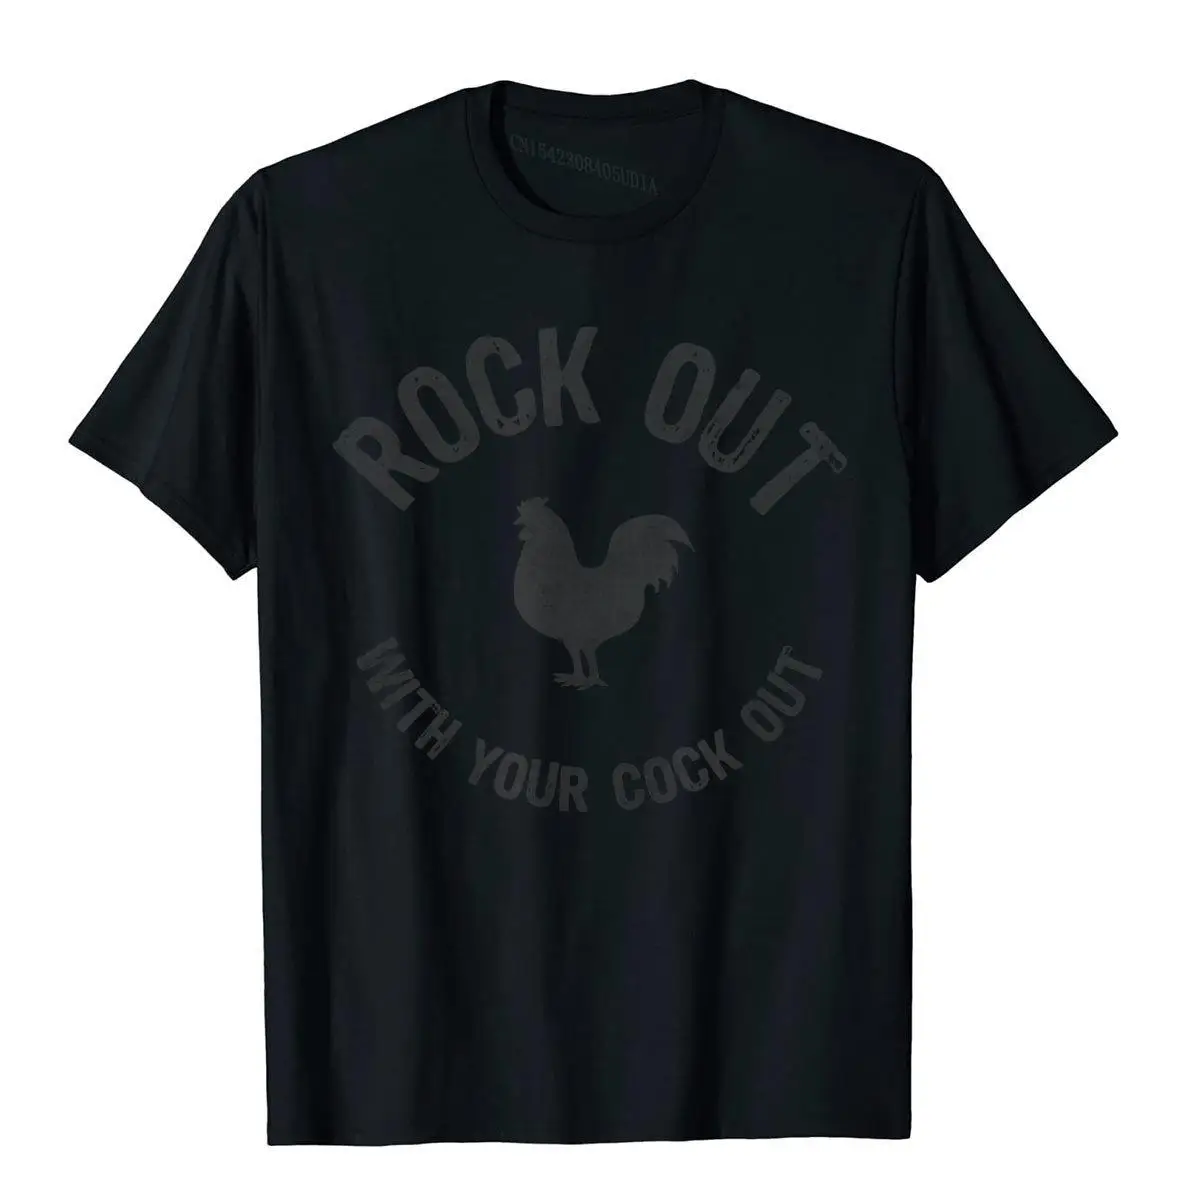 Rock Out With Your Cock Out Funny T-Shirt__B11381black